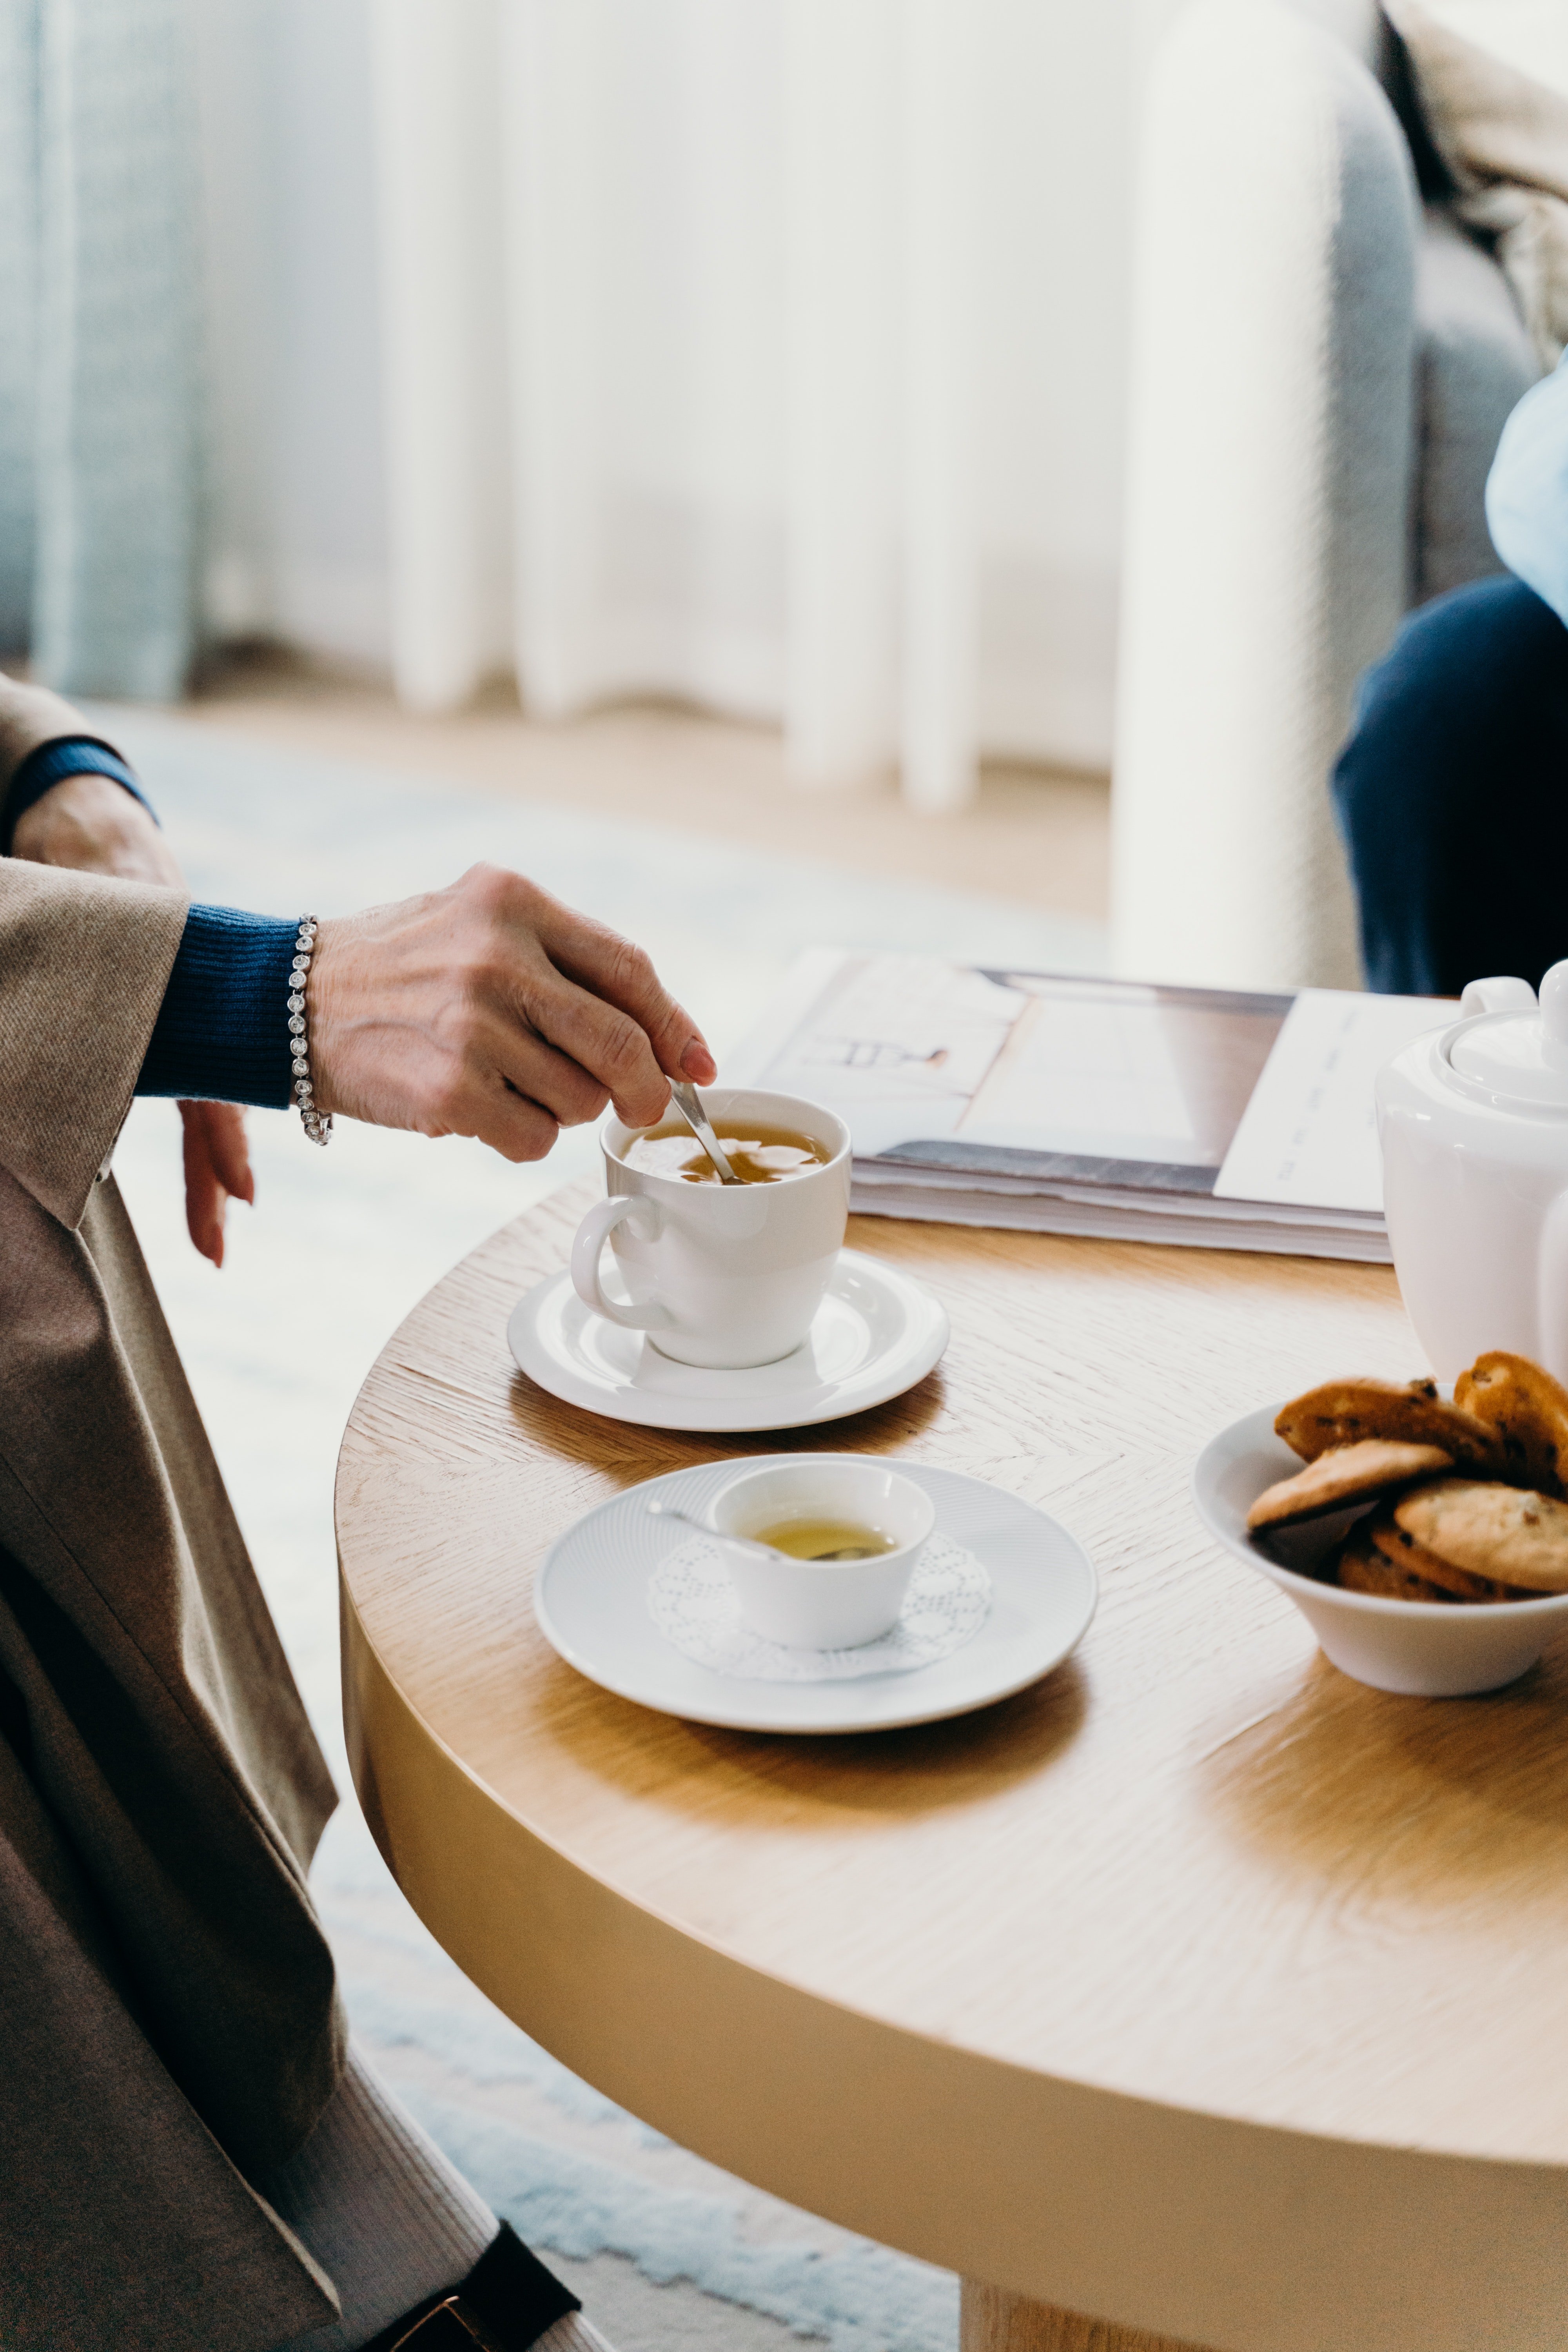 Shirley and Evelyn had a lovely chit-chat session over tea on their first meeting. | Source: Pexels